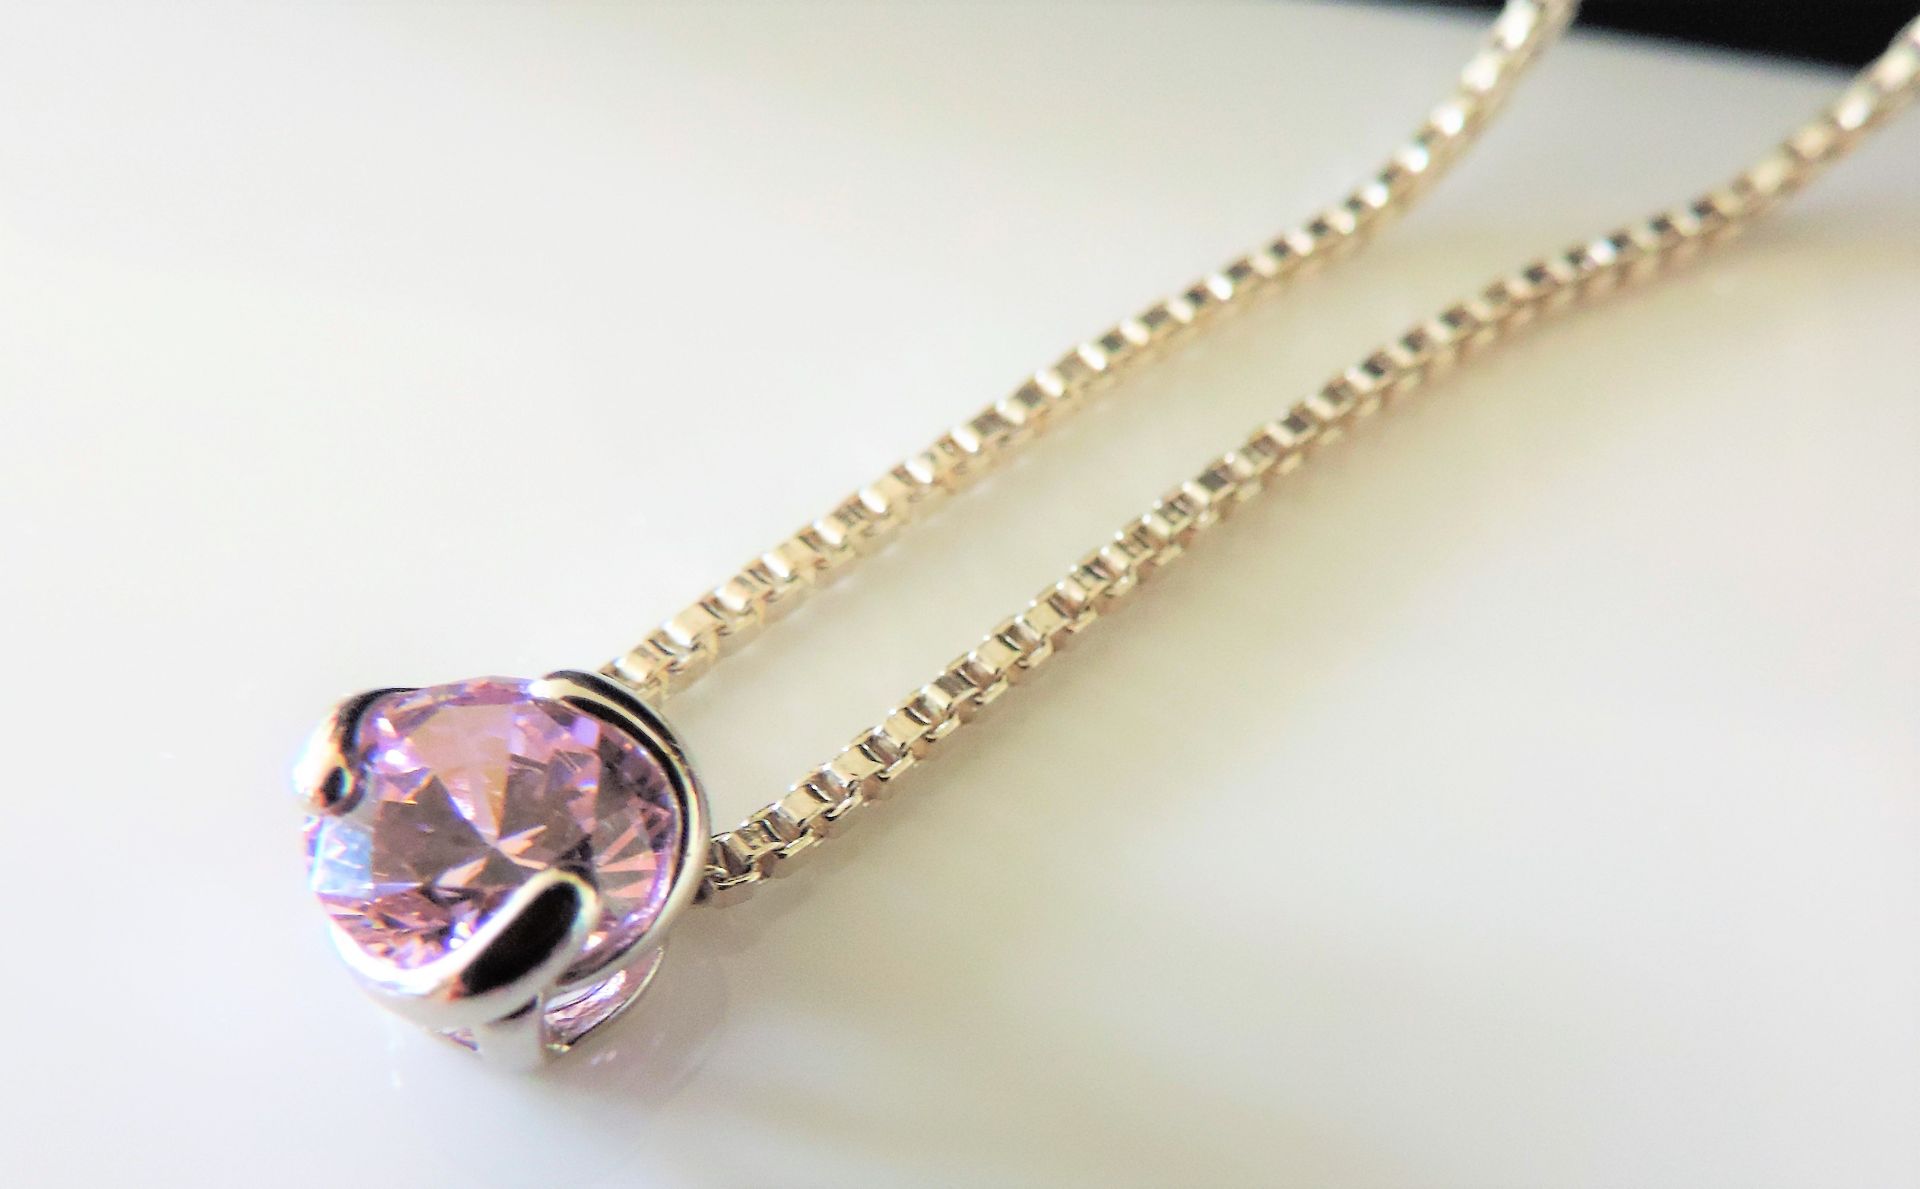 Sterling Silver Pink Topaz Pendant Necklace - Image 2 of 2